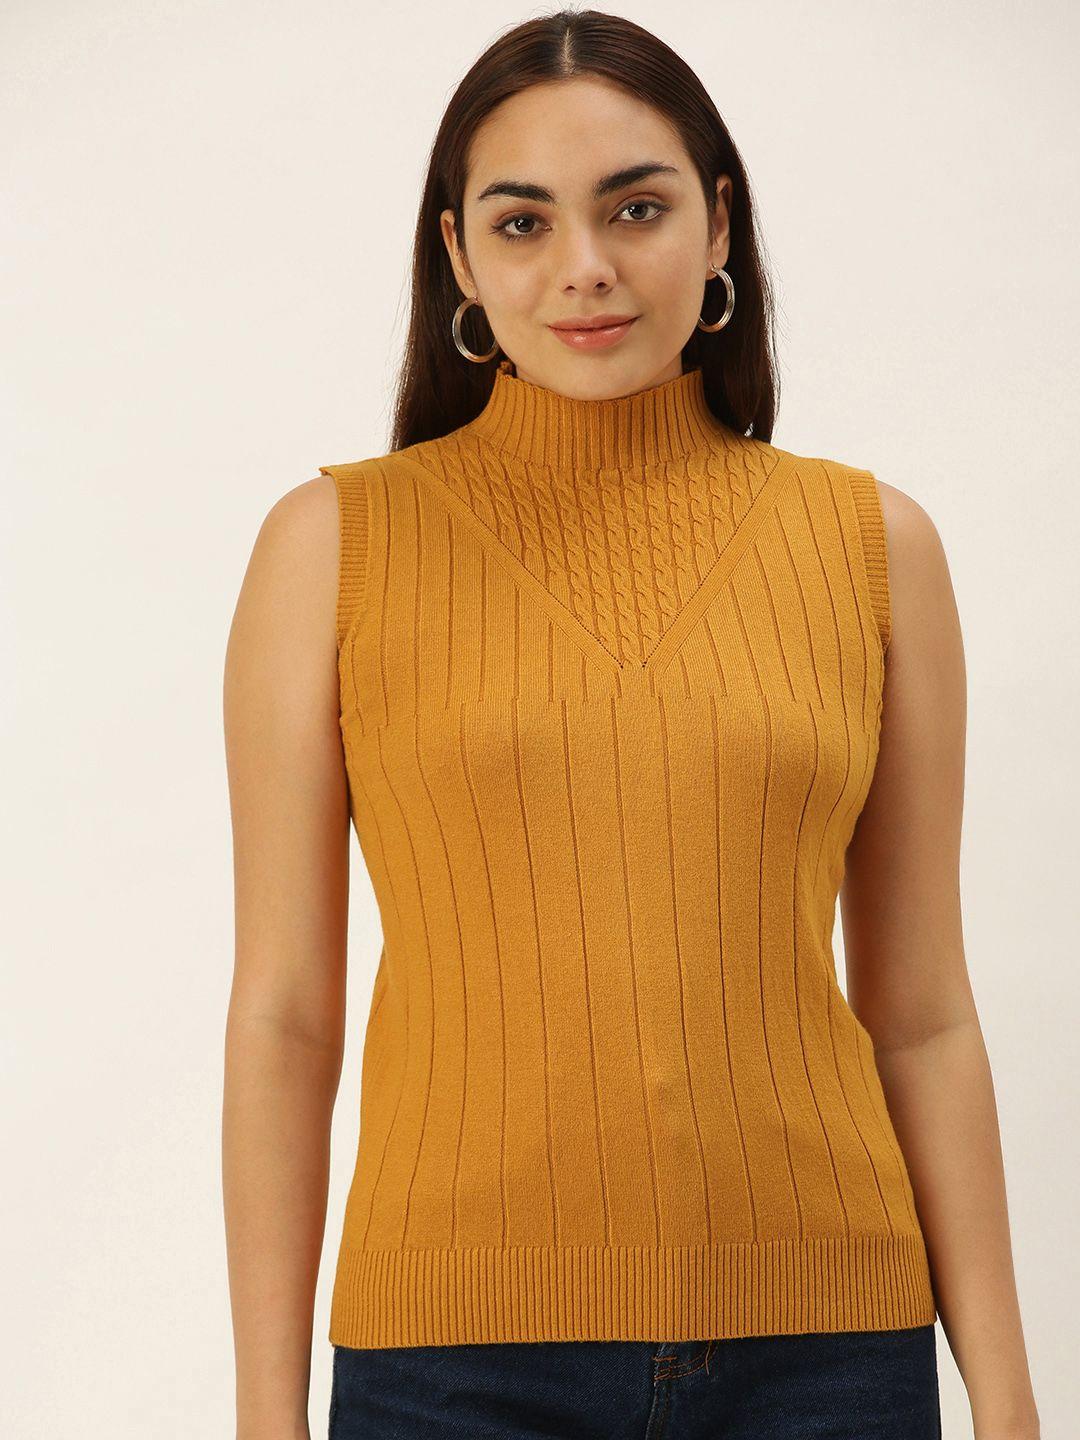 sheczzar women mustard yellow cable knit sleeveless pullover